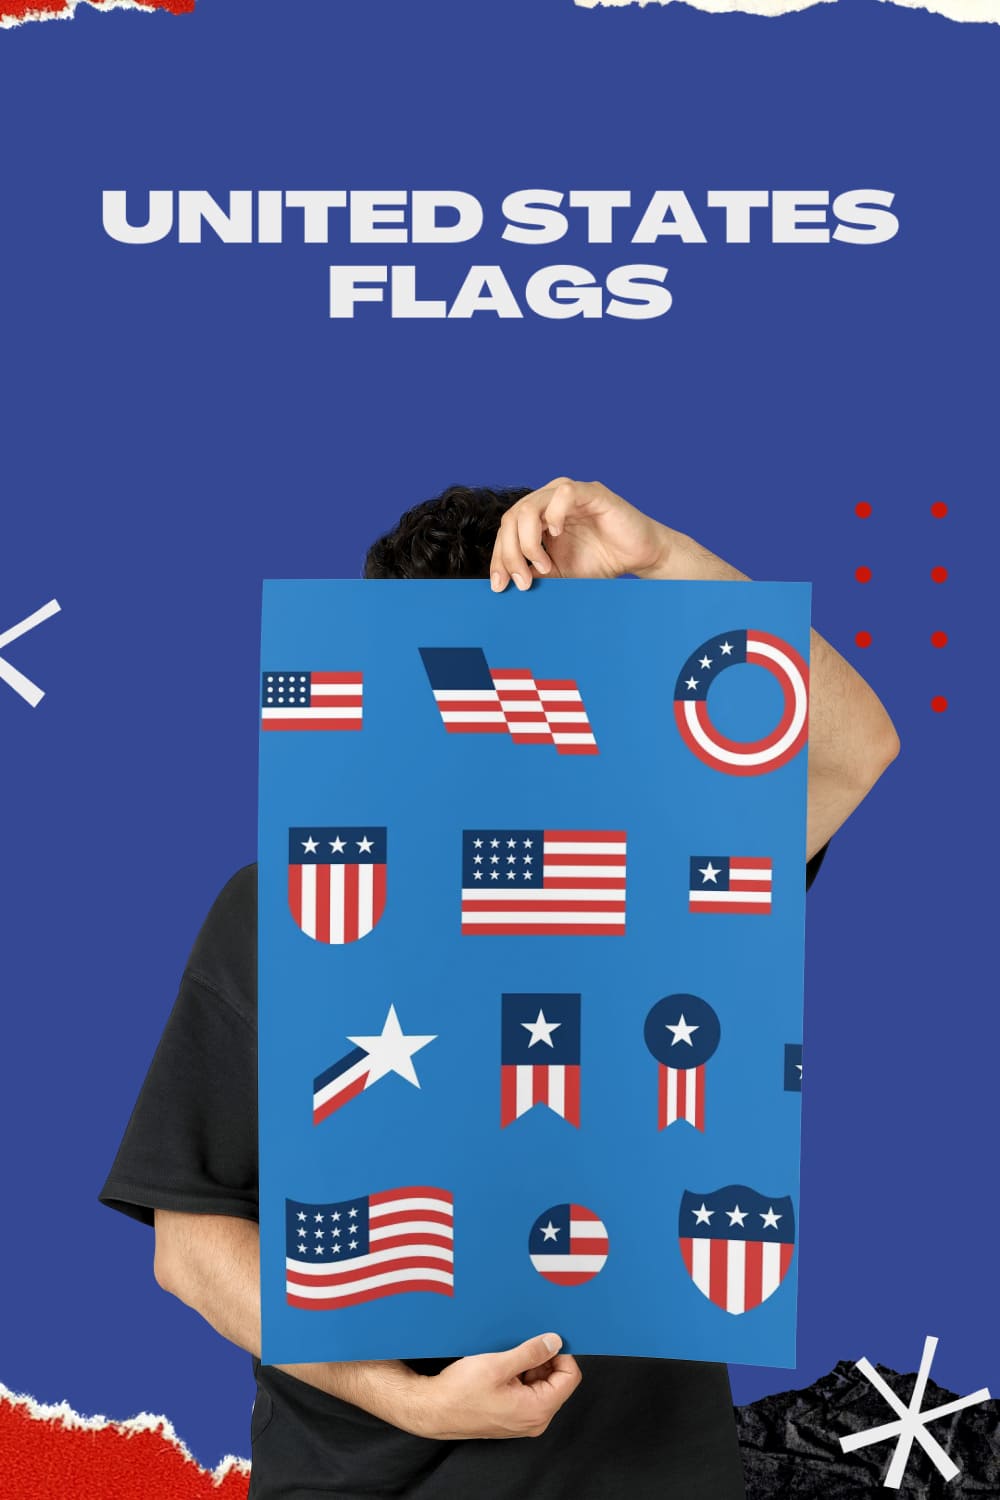 united states flags 1 984